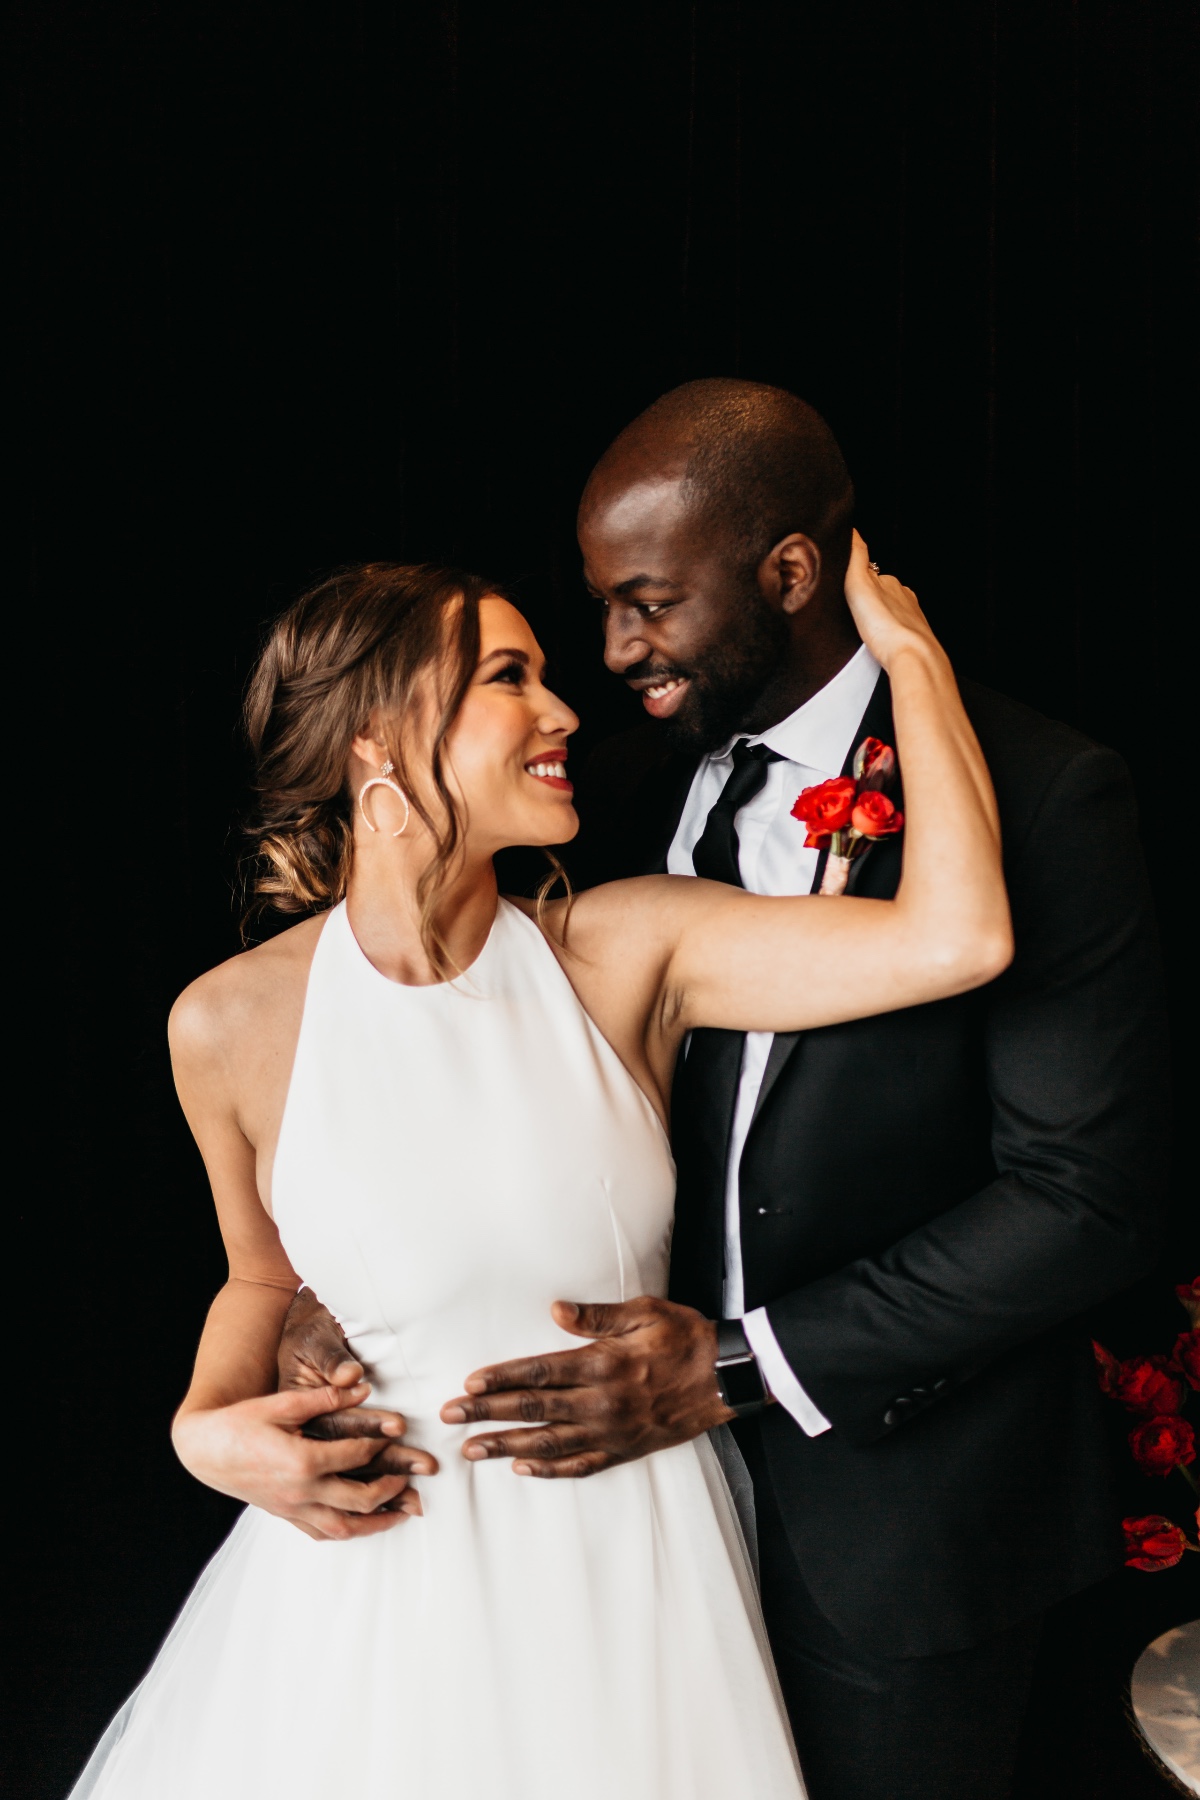 This Stylish Elopement Inspiration Shoot Will Have You Seeing Red...In a Good Way